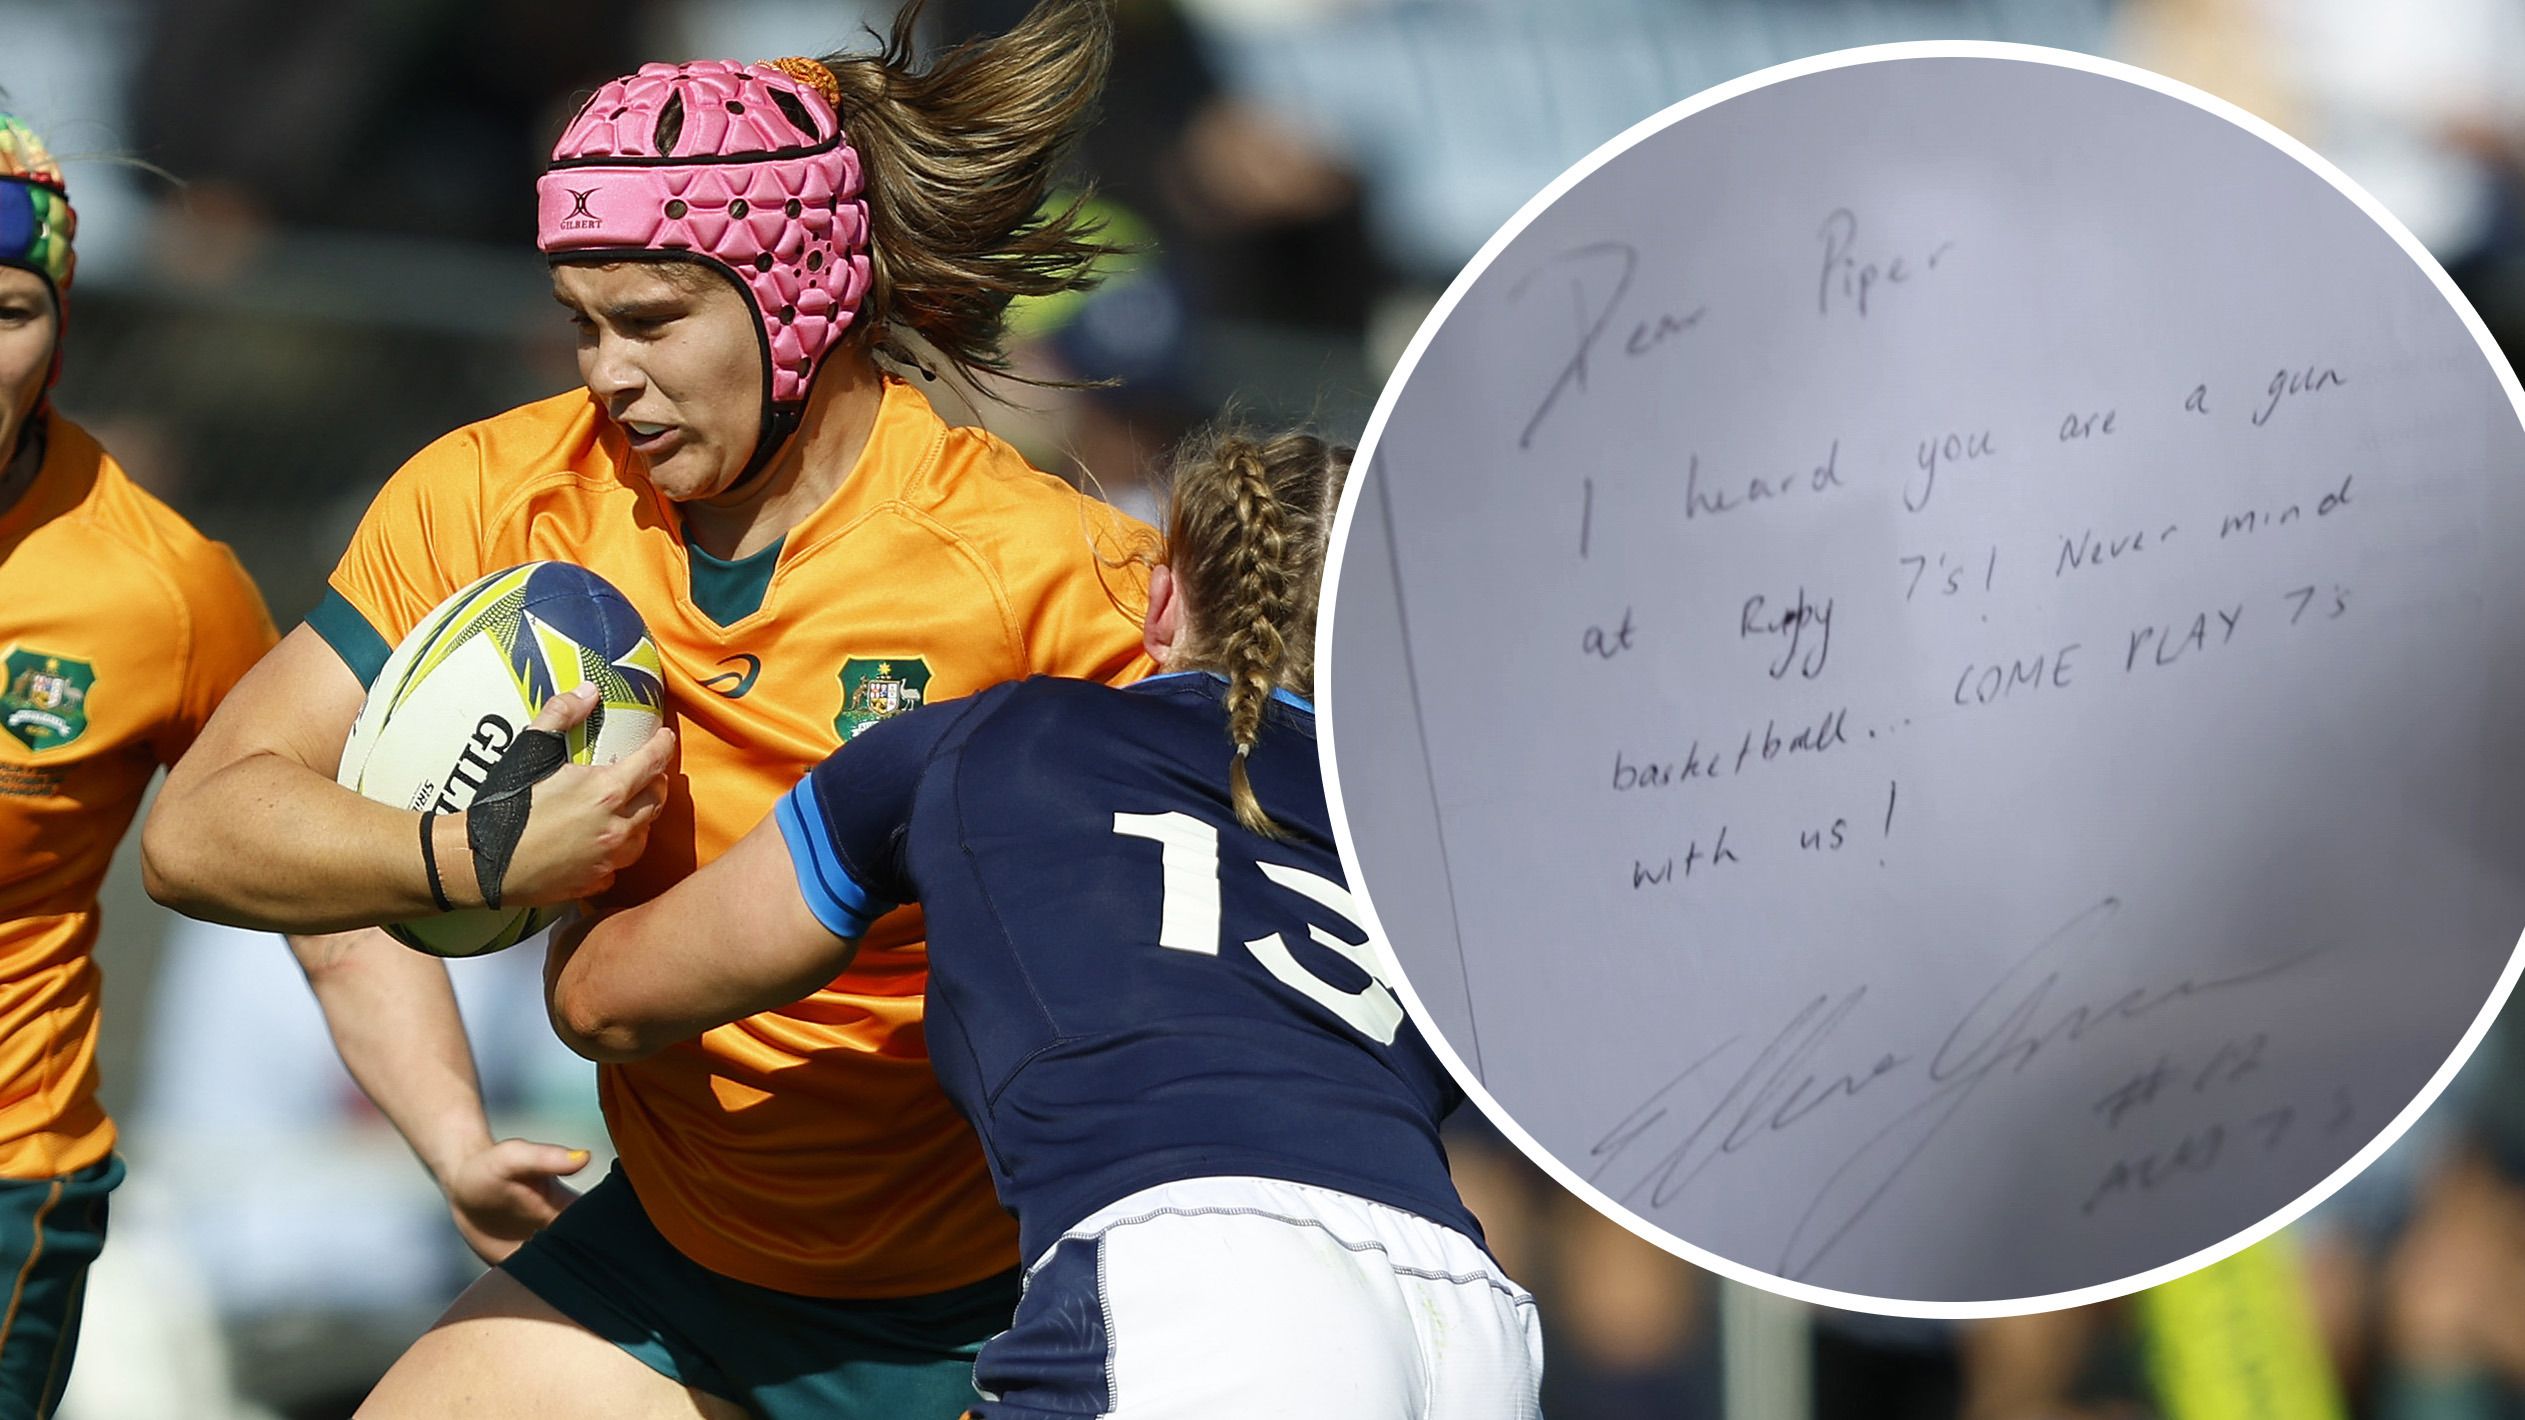 The letter Ellia Green wrote to Piper Duck to convince her to play rugby sevens.